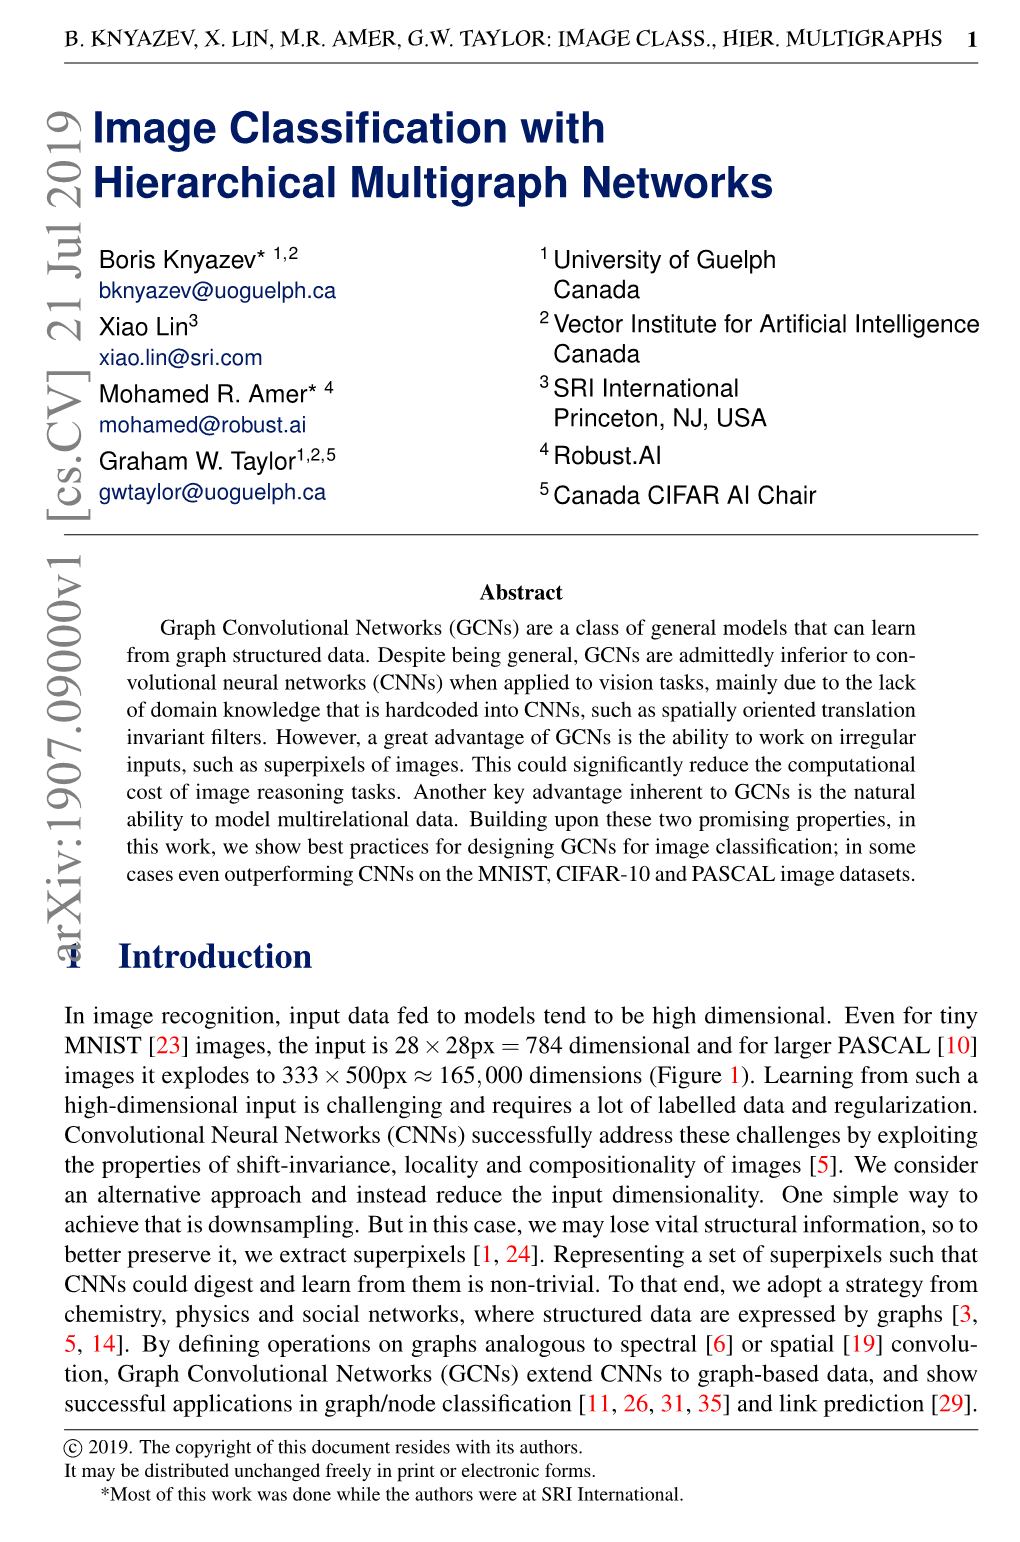 Image Classification with Hierarchical Multigraph Networks